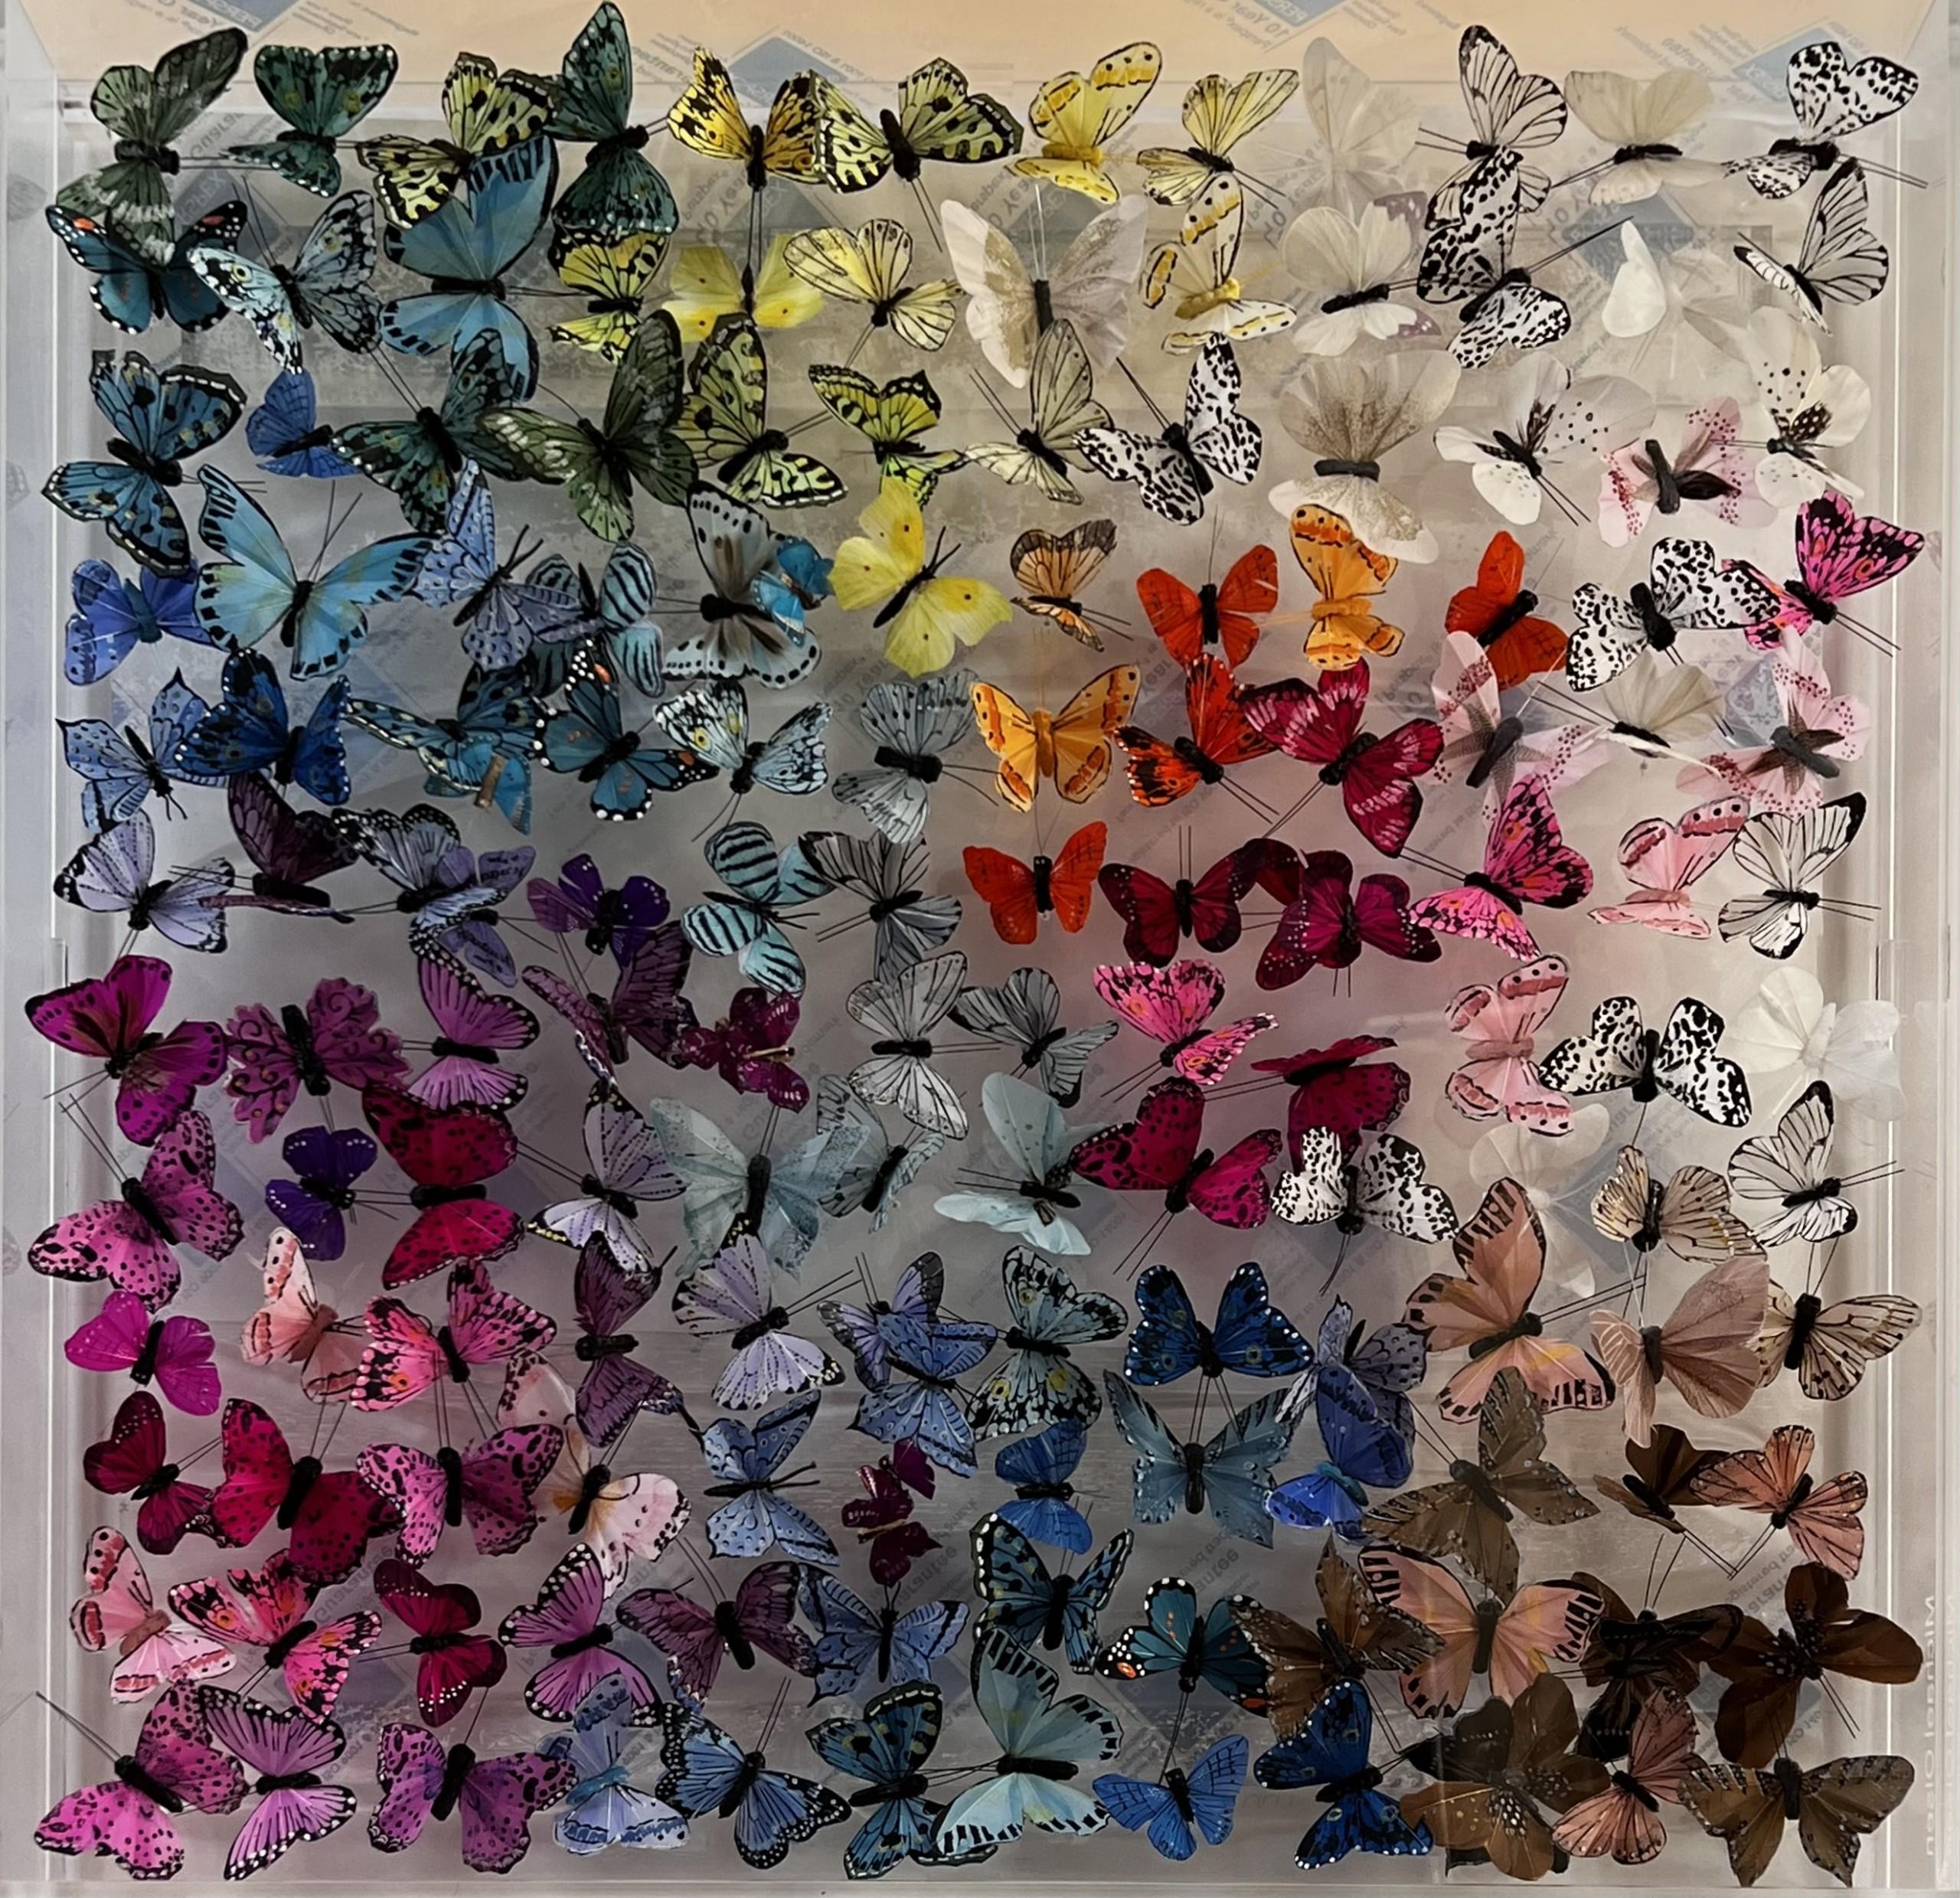 Wychwood White, Butterfly Artwork, 3D Contemporary Perspex Art, Statement Art - Mixed Media Art by Michael Olsen